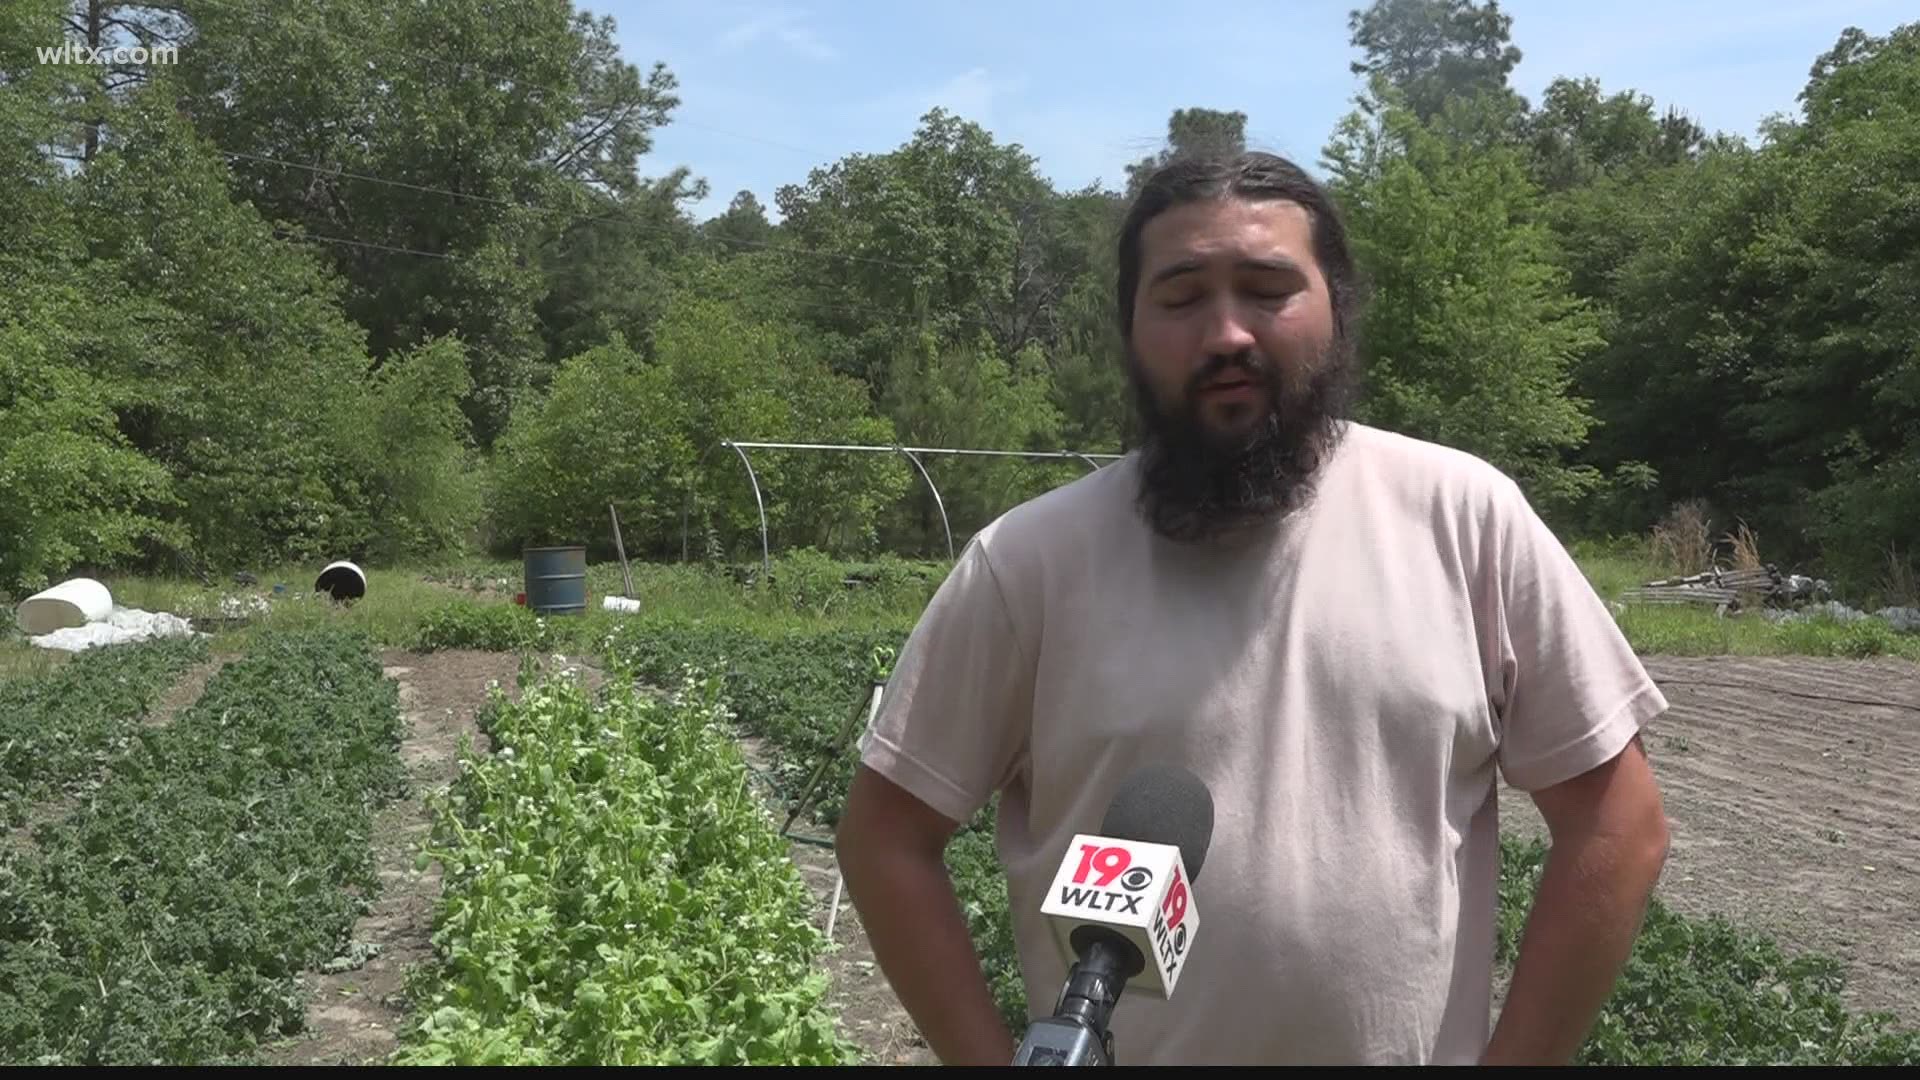 A GoFundMe was started and has exceeded the goal to help get the organic farm back on its feet.